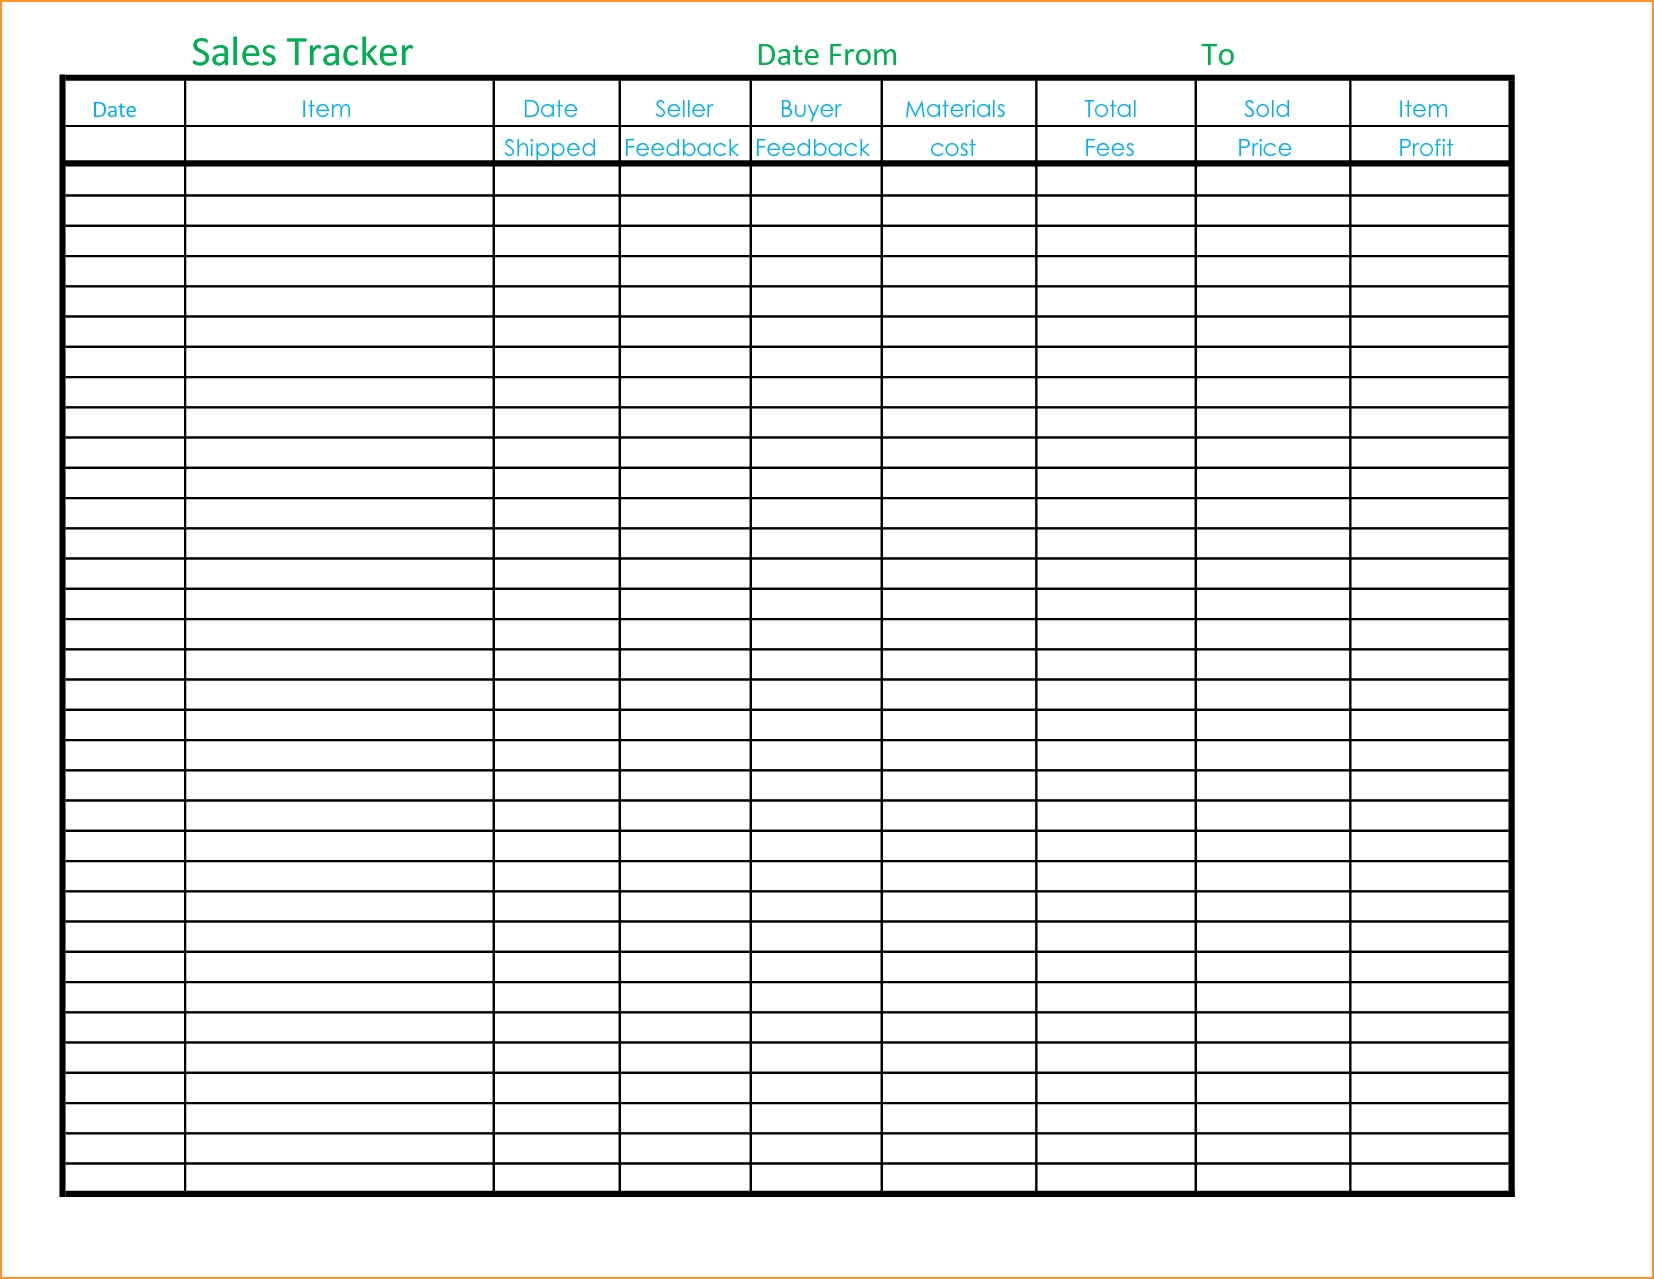 Free Excel Crm Template 28 Images Excel Templates, What S New Within in Lead Generation Tracking Spreadsheet